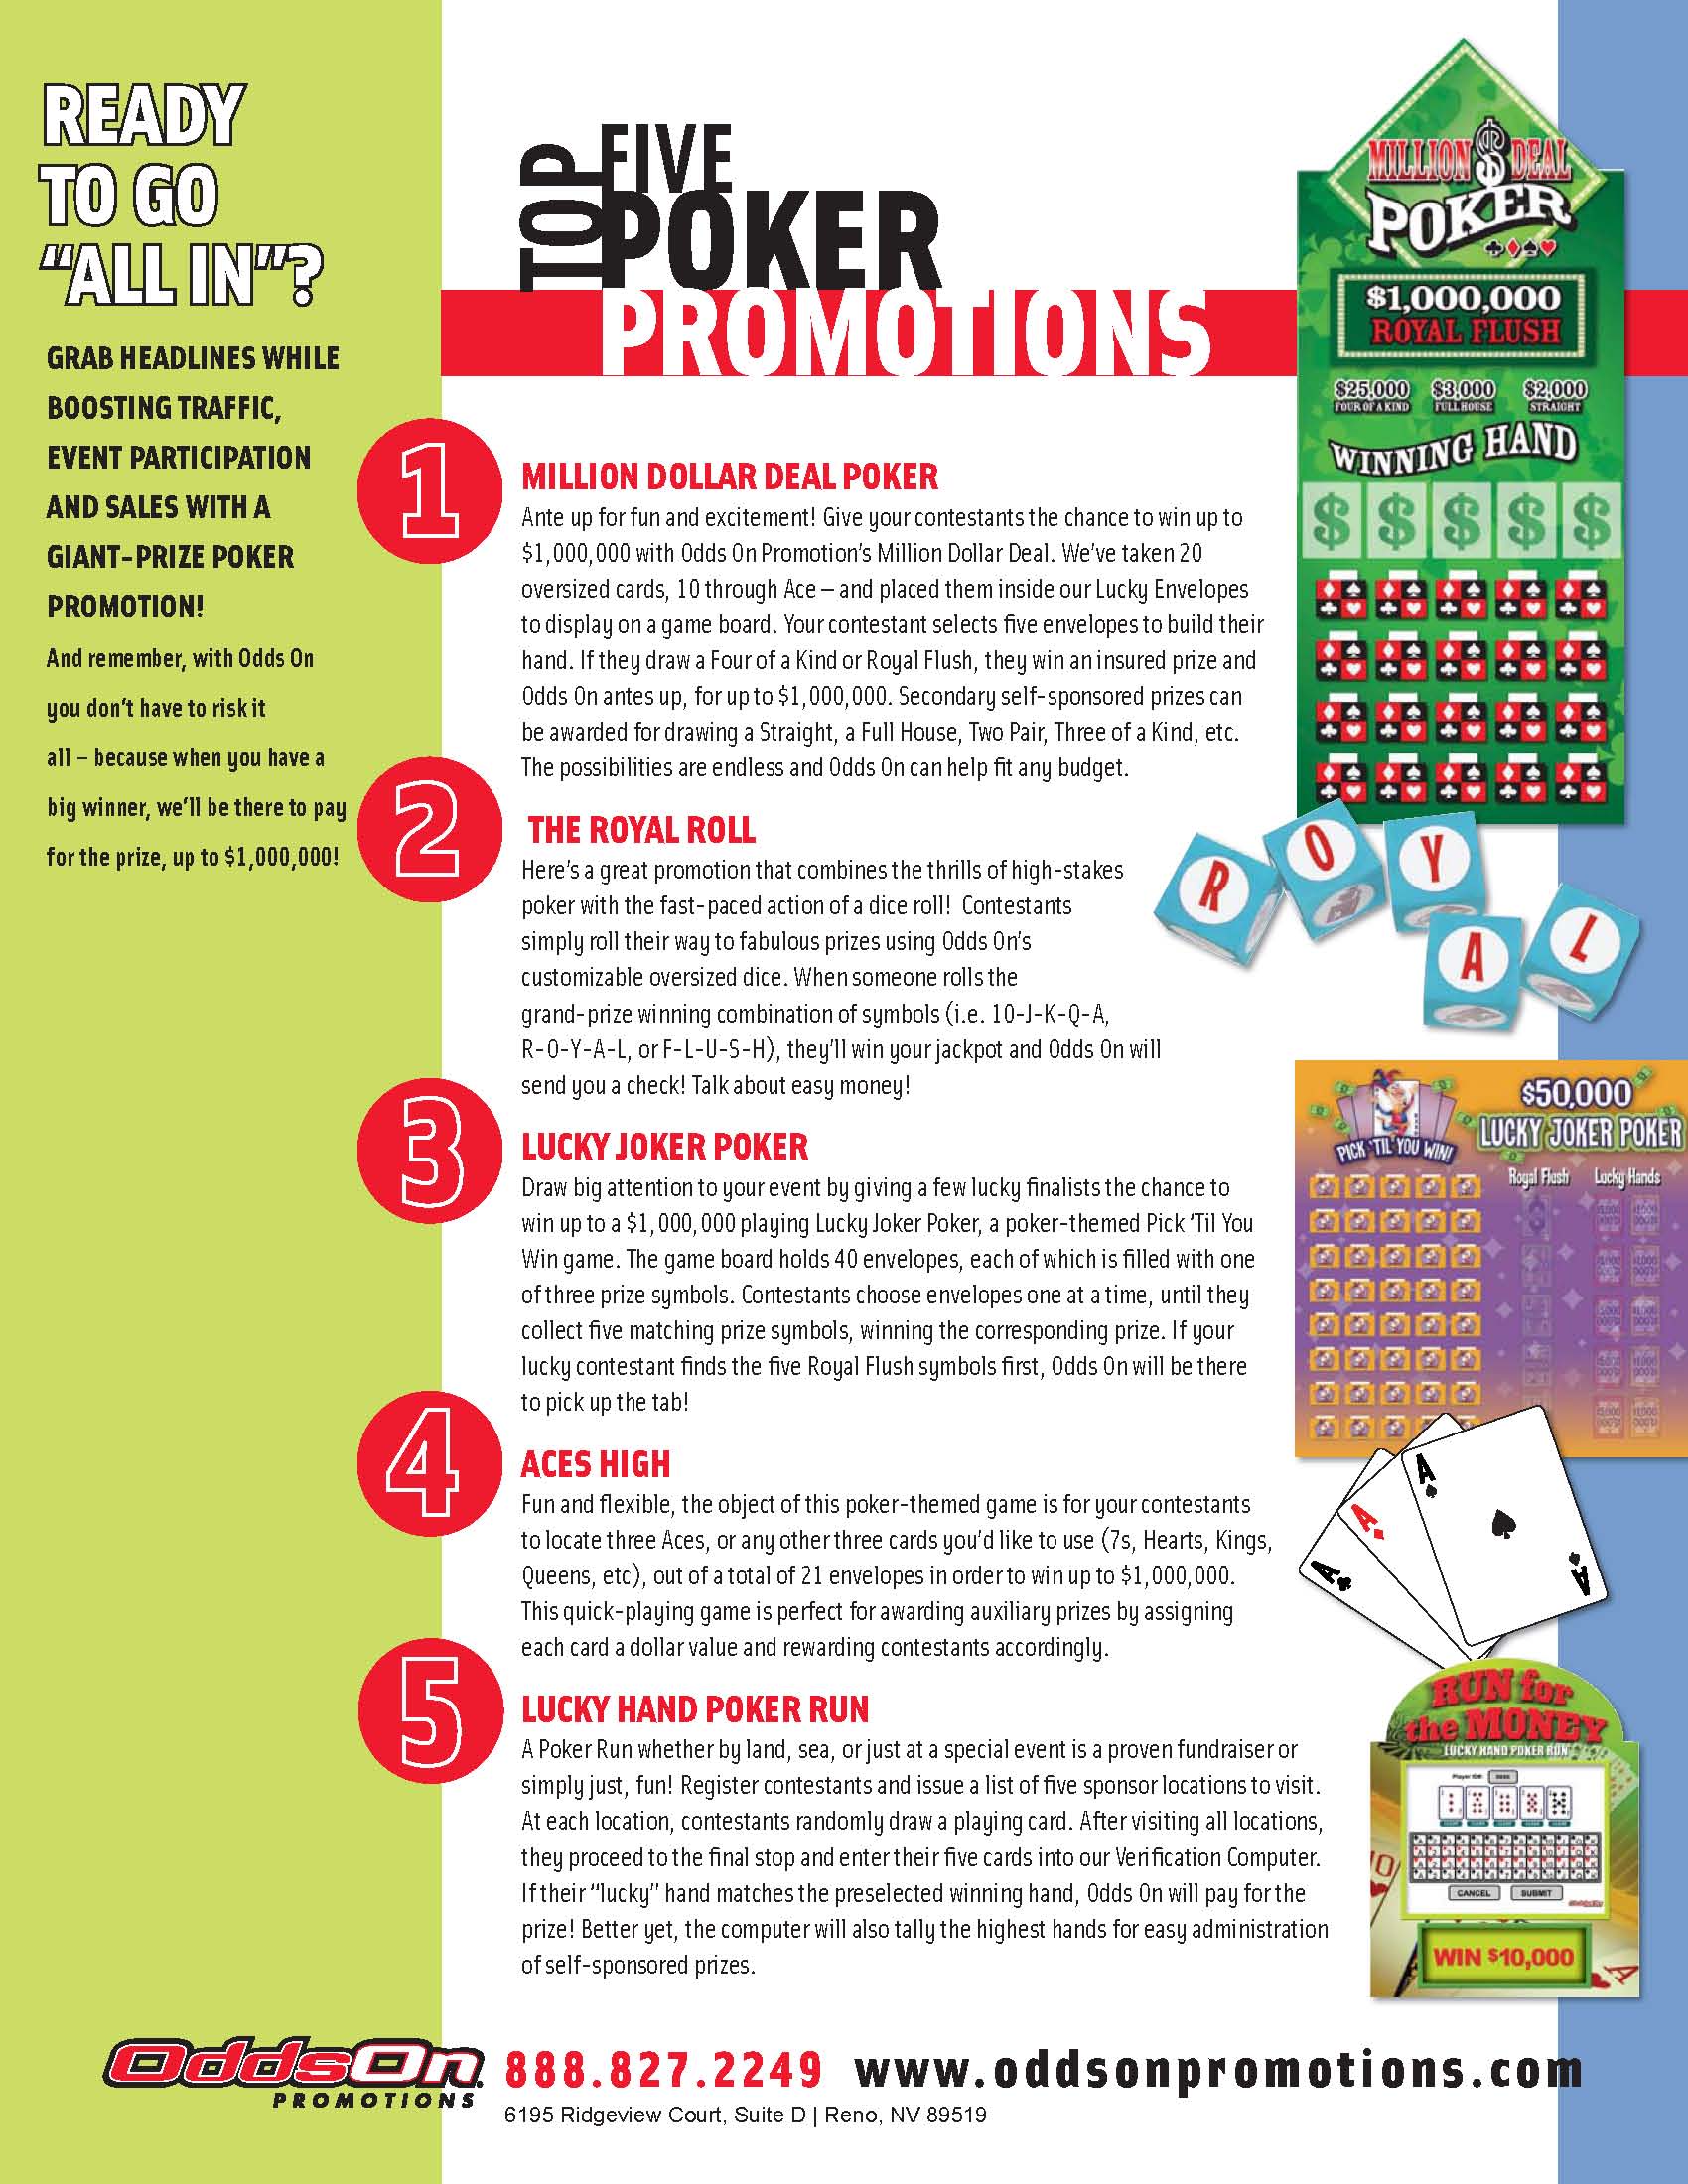 Poker Promotions